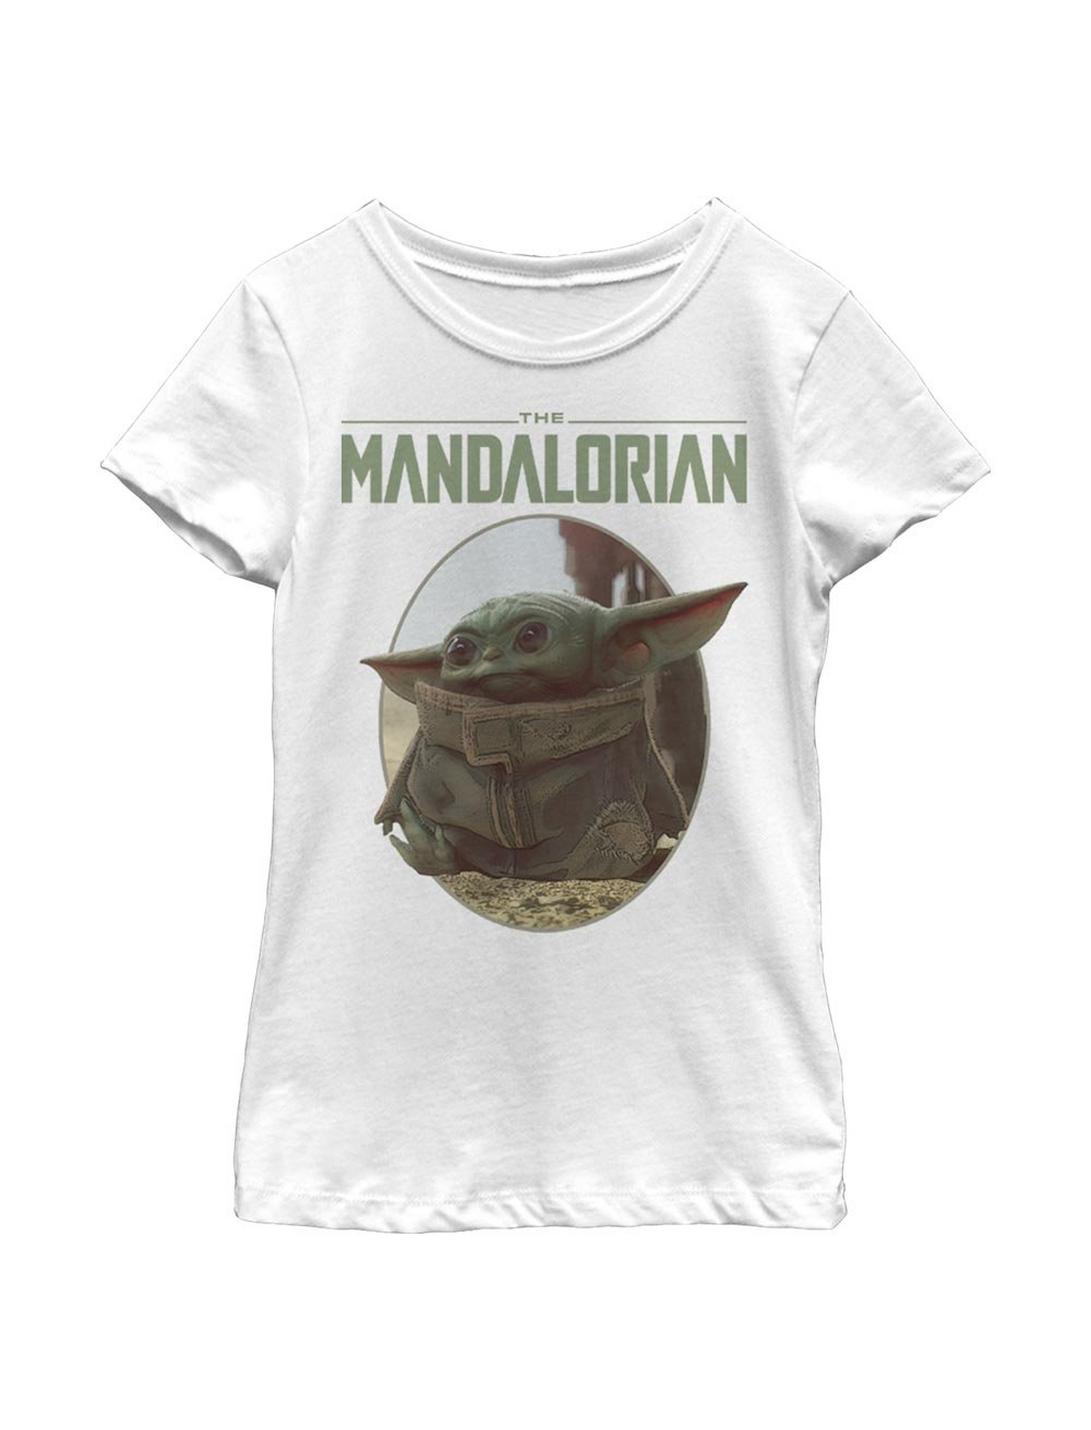 Plus Size Star Wars The Mandalorian The Child Cute Look Youth Girls T-Shirt, WHITE, hi-res